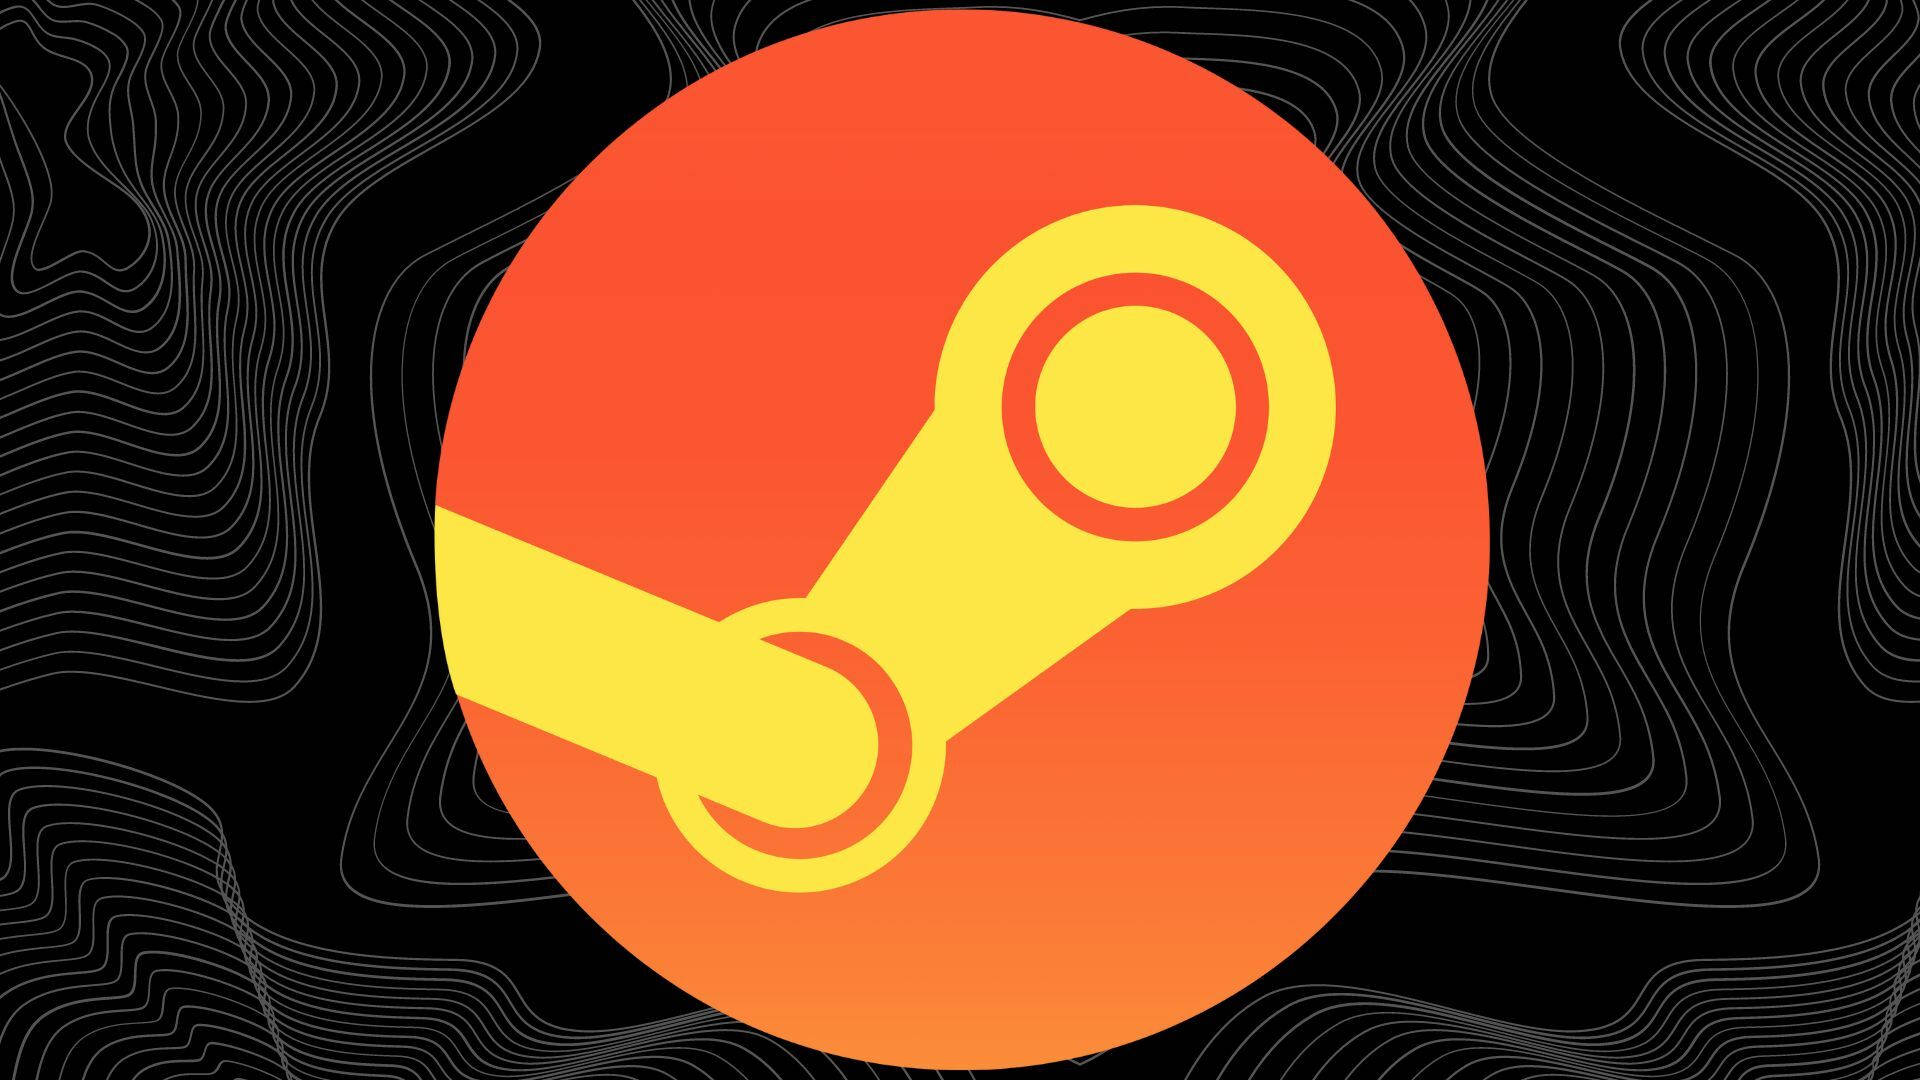 How to get free Steam keys